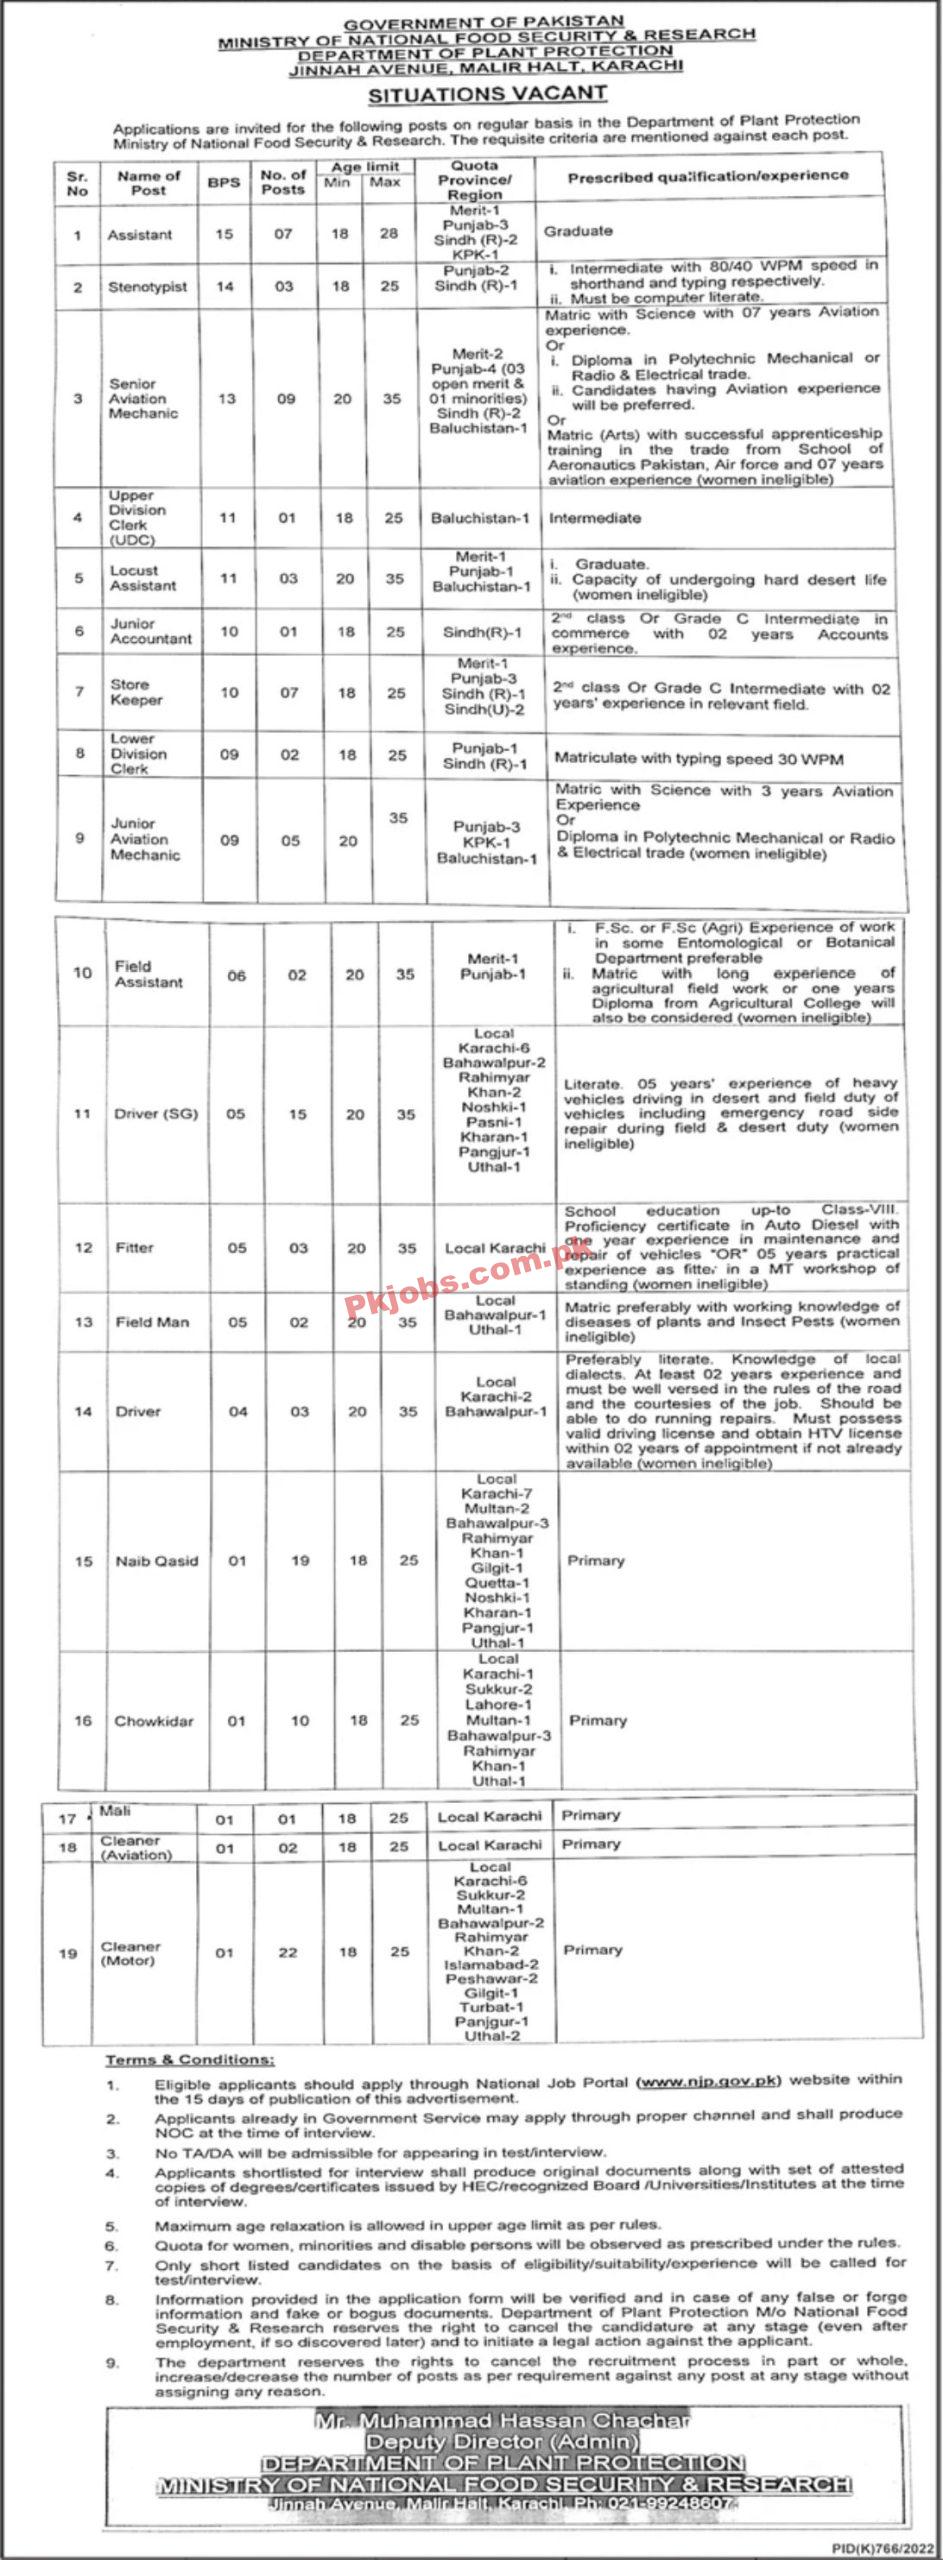 Jobs in Ministry of National Food Security & Research Department